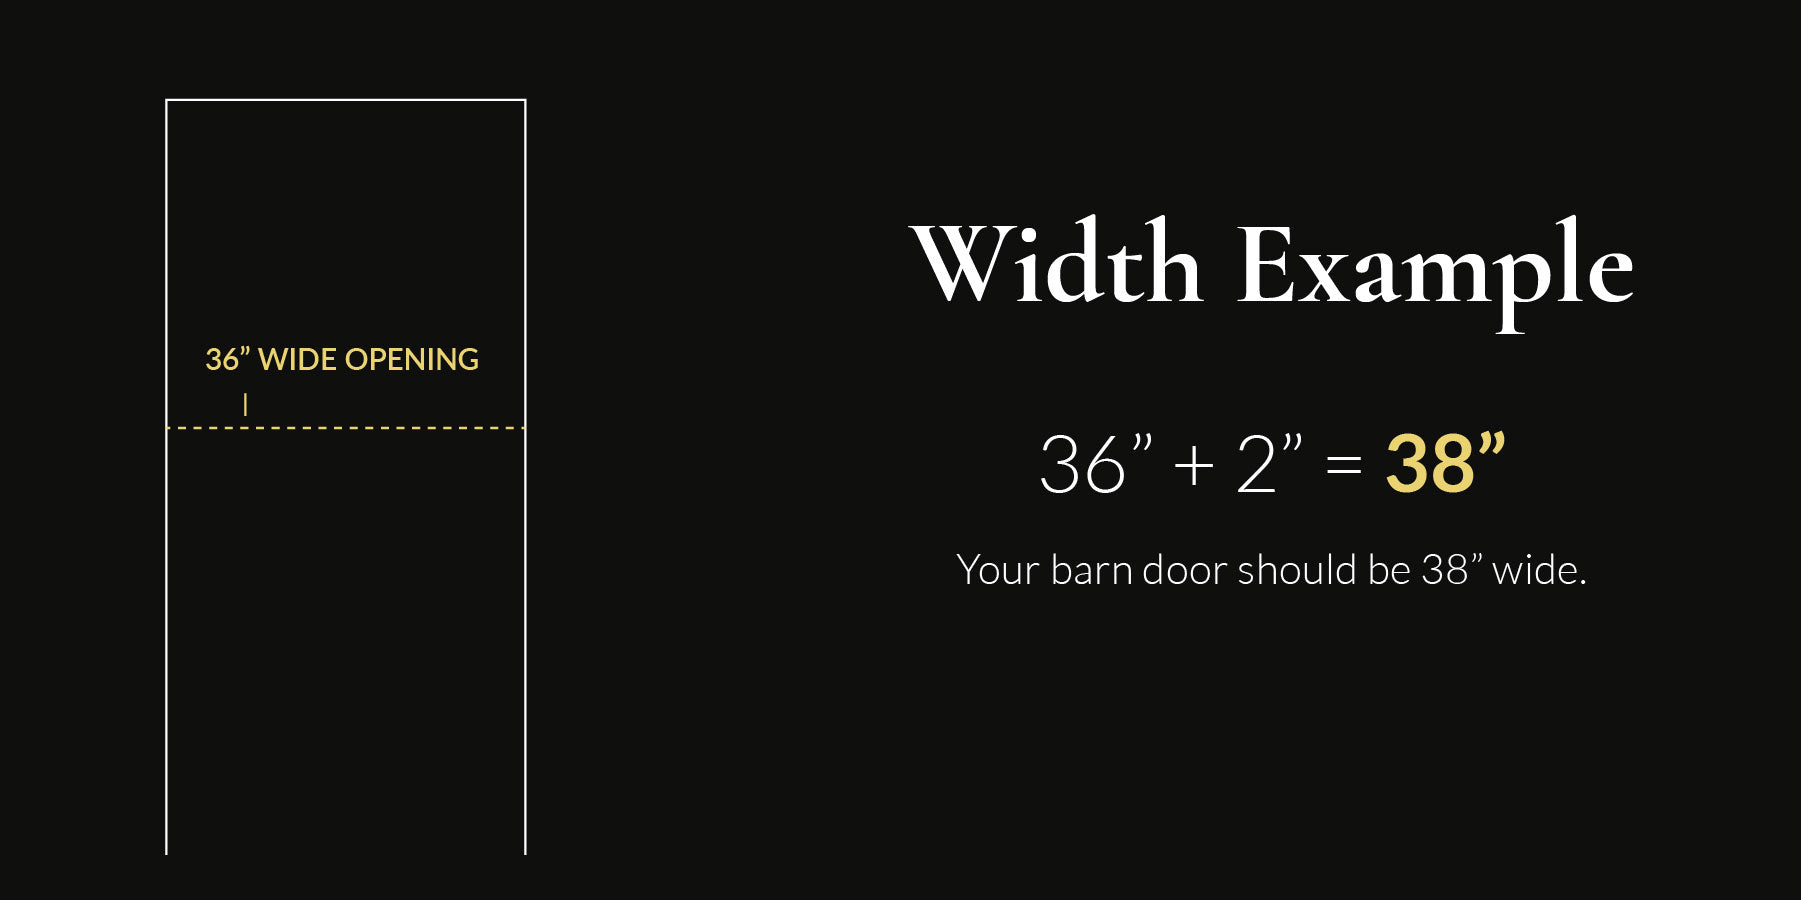 Barn door width measurement example with illustration. Explanation and description of the instructions are below the image.